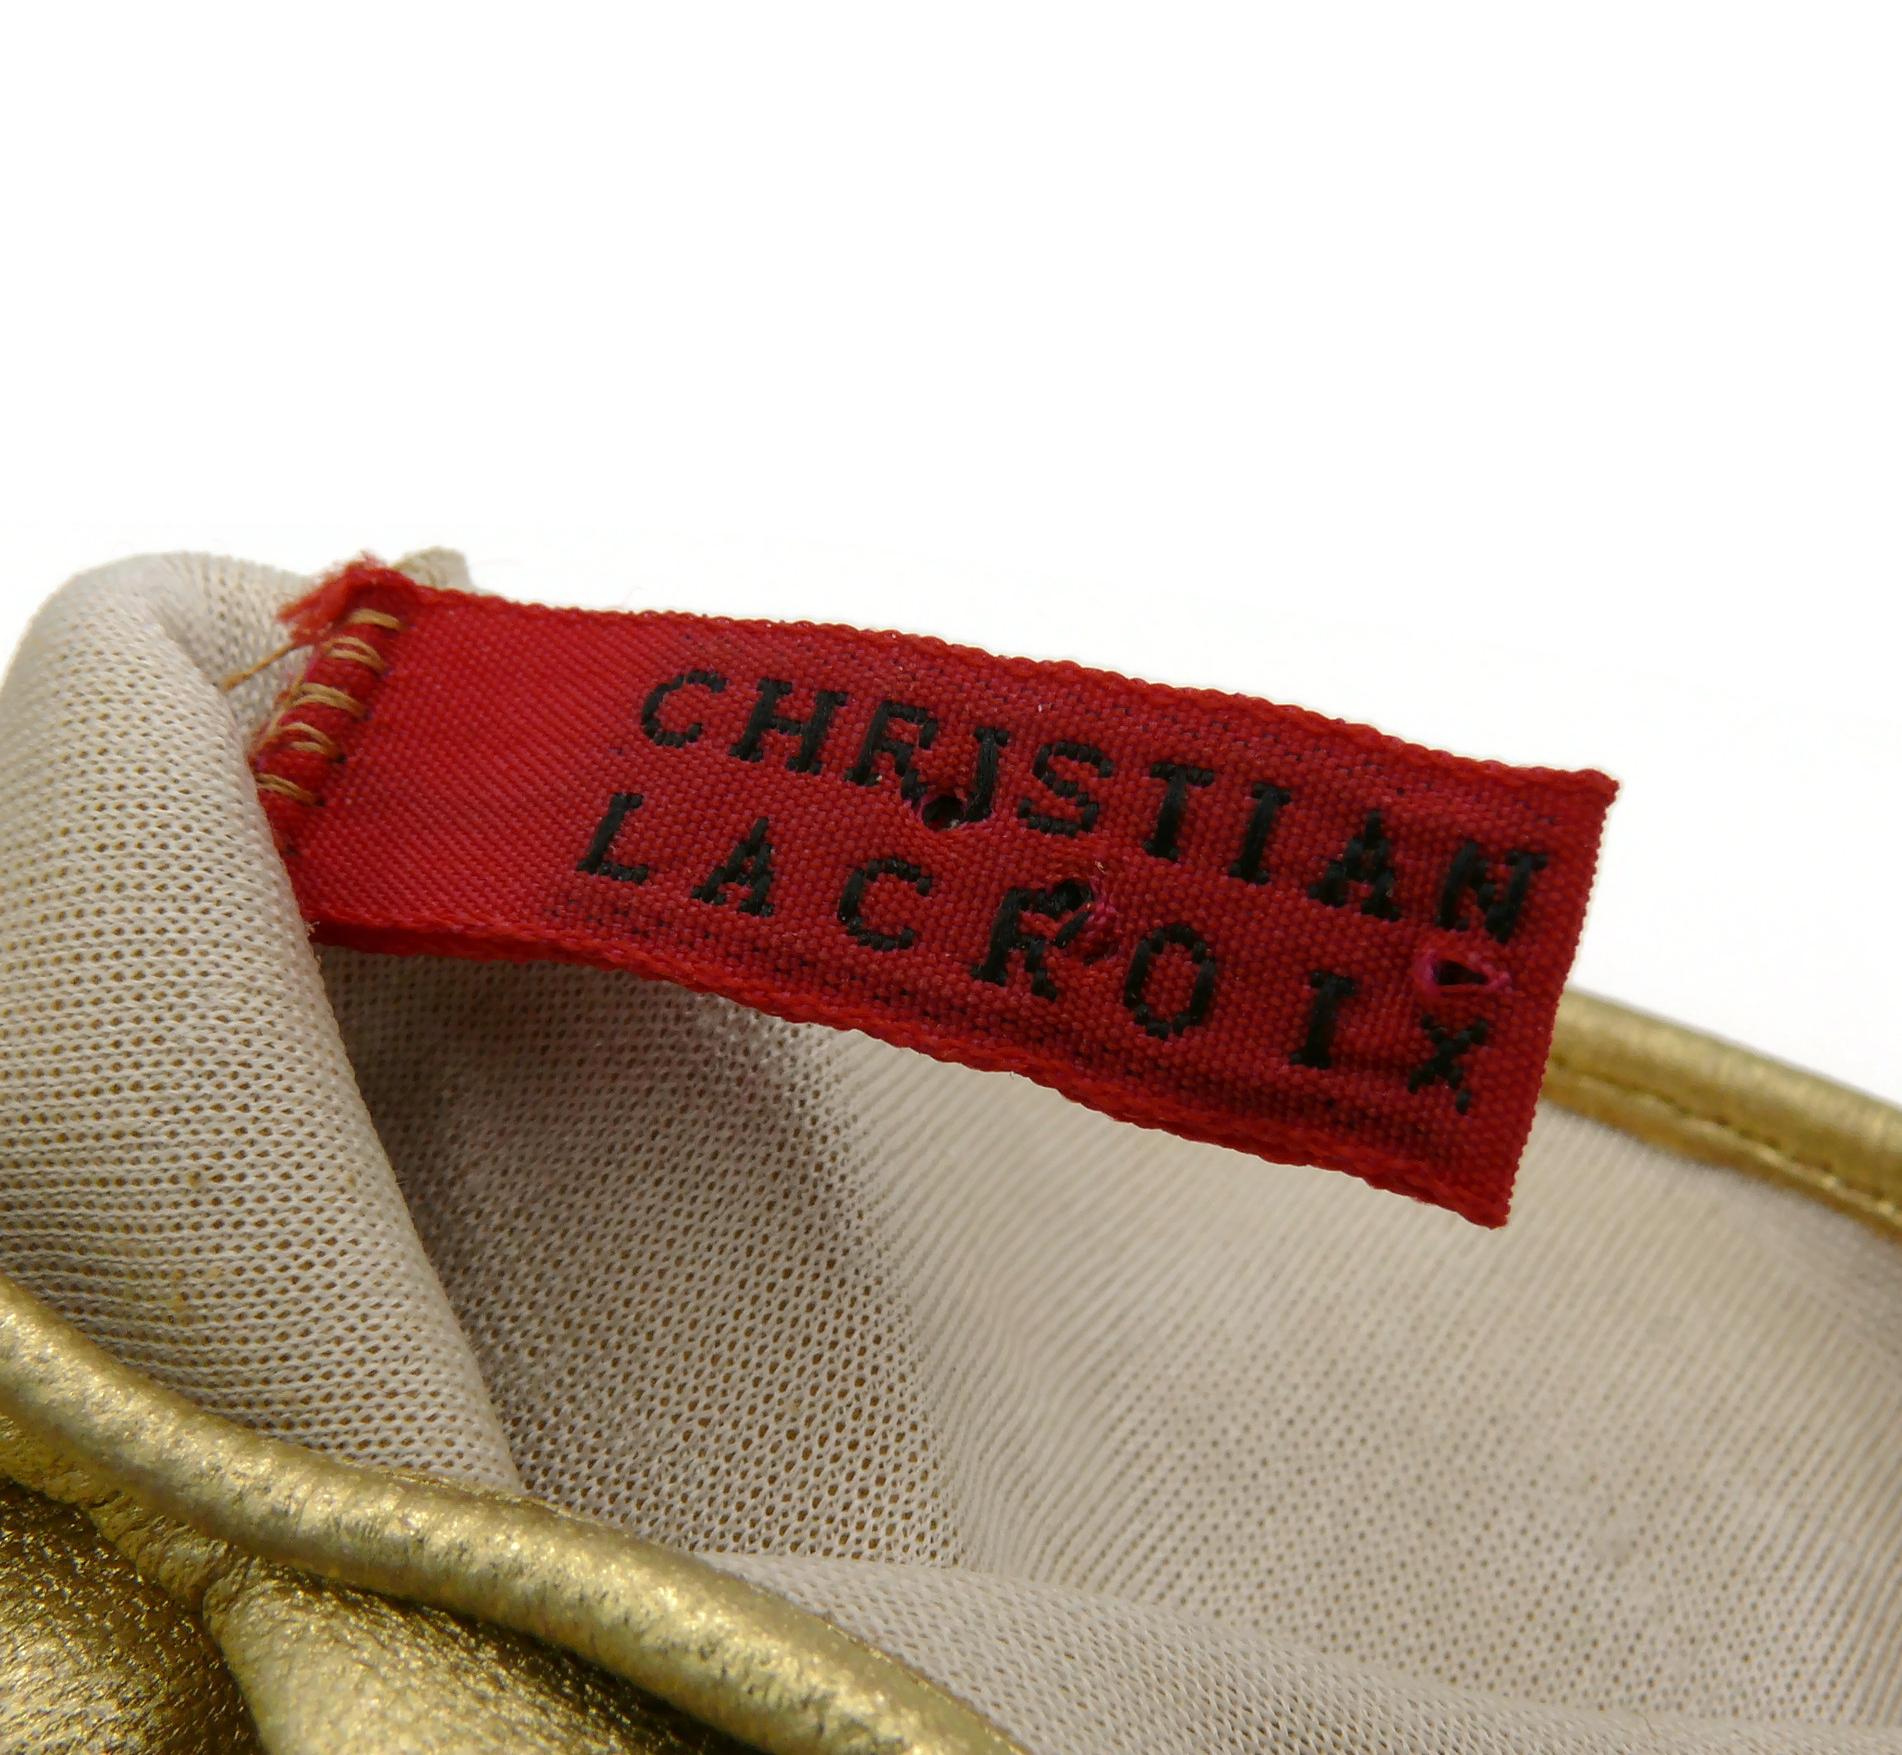 CHRISTIAN LACROIX Vintage Jewelled Golden Leather Gloves Size 7 For Sale 4